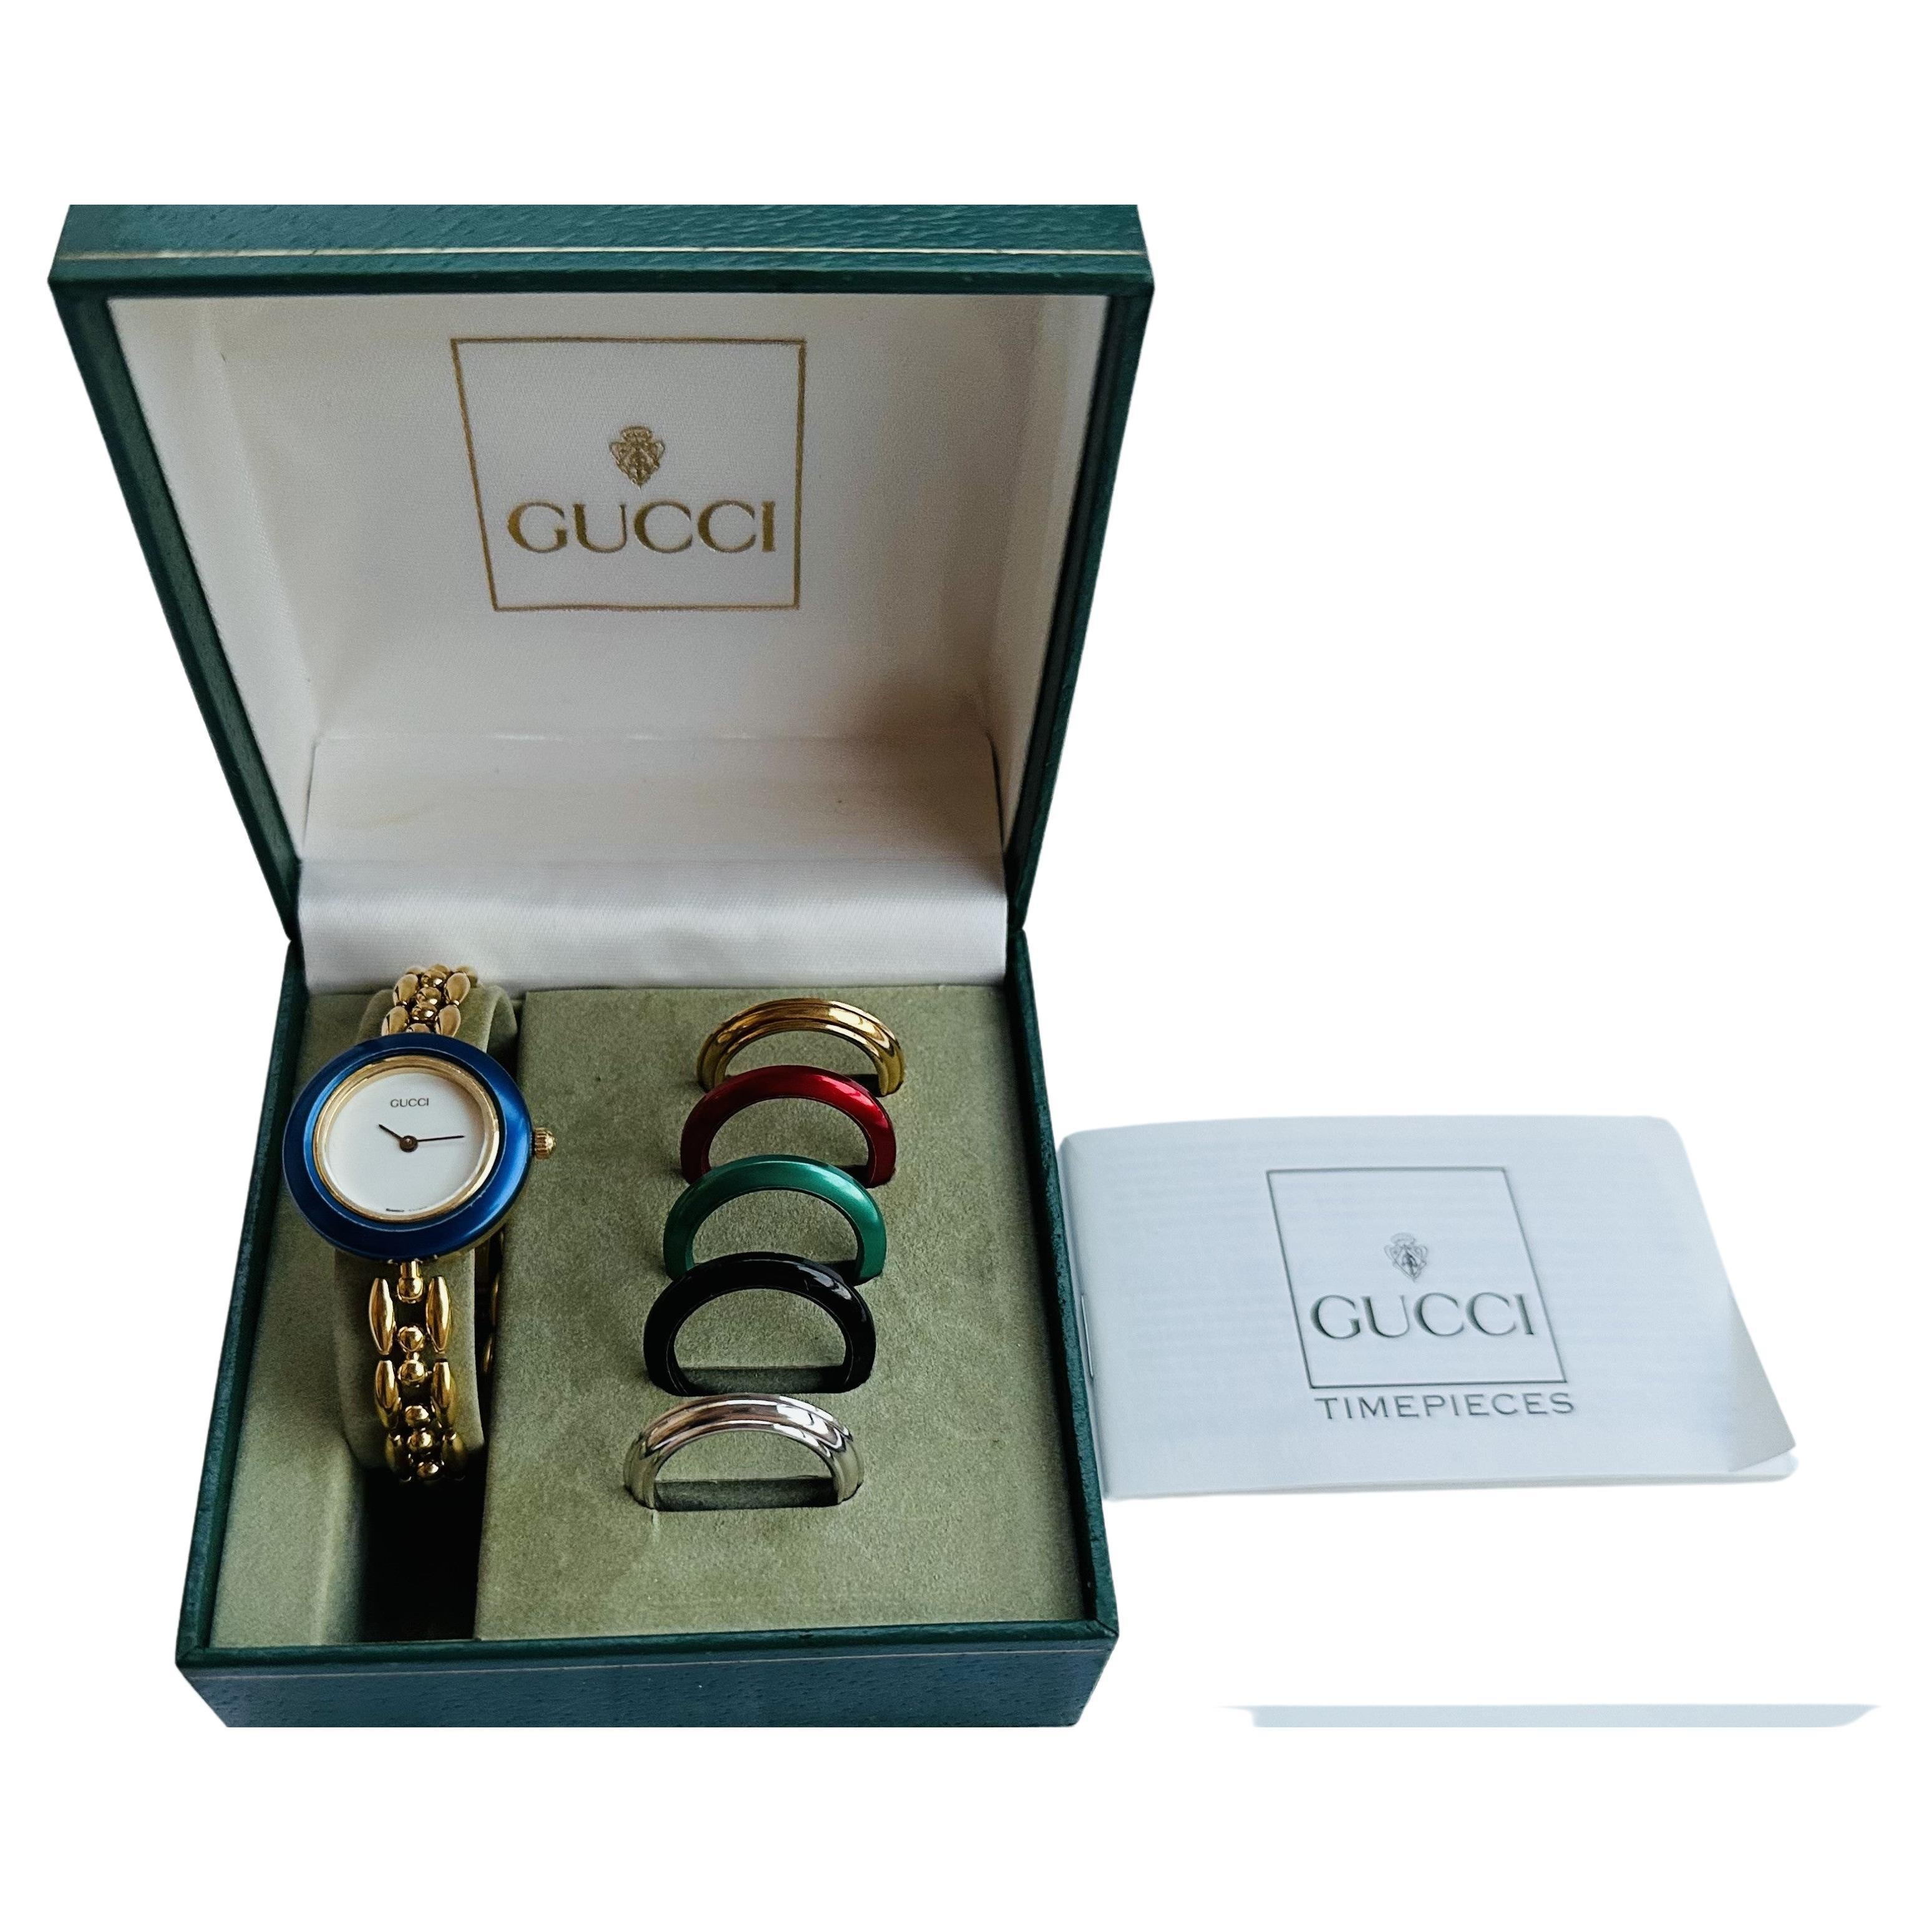 Gucci 11/12.2 Ladies Bangle Watch with Interchangeable Bezels Full Set